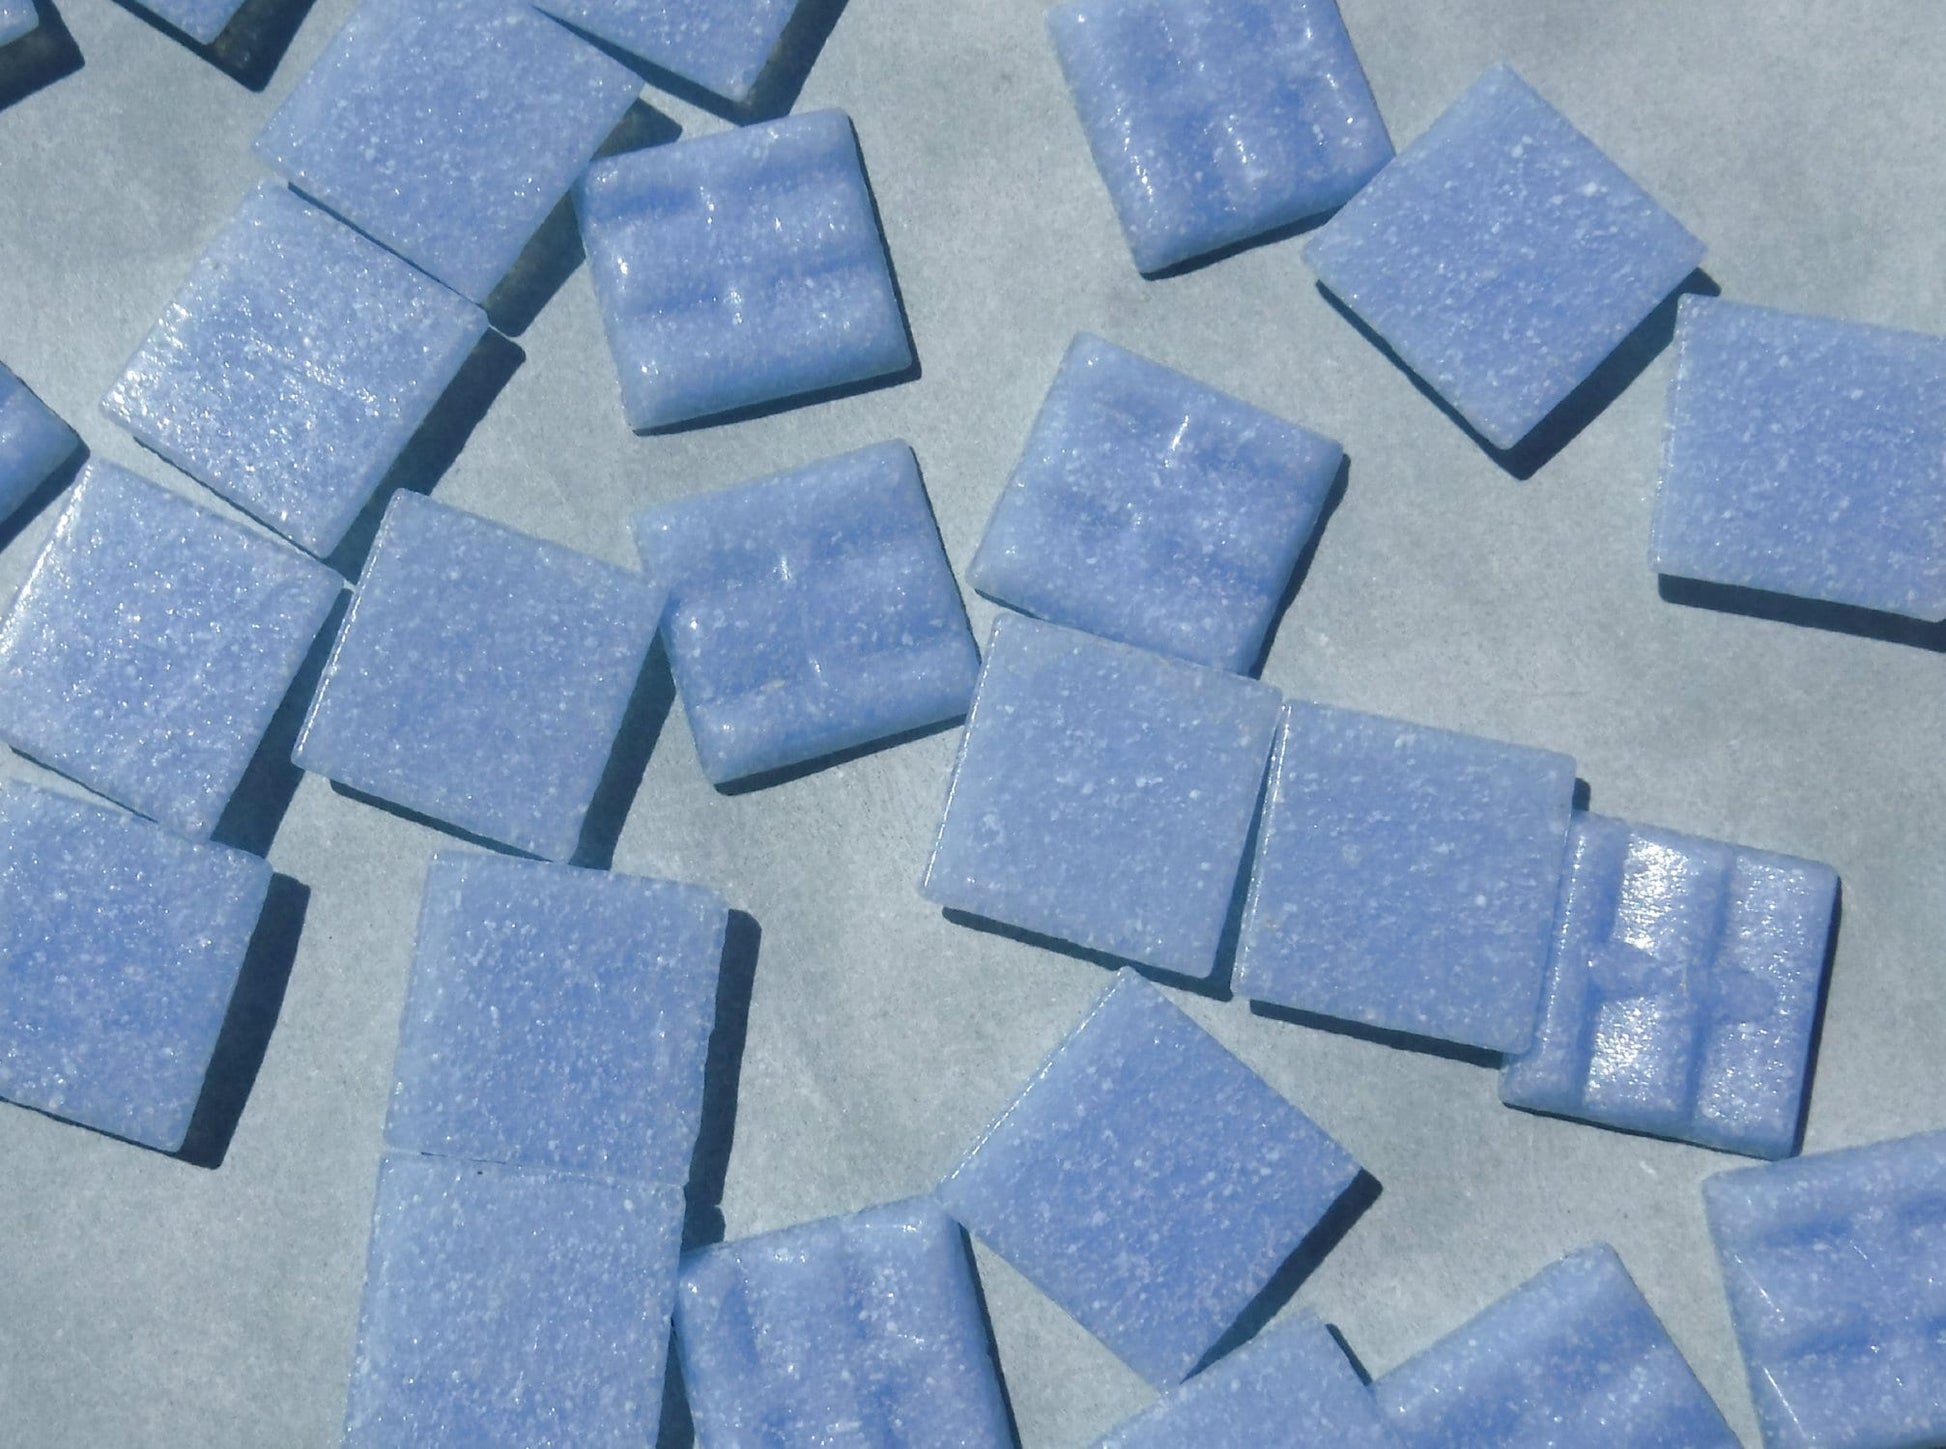 Cloudy Blue Glass Mosaic Tiles Squares - 20mm - Half Pound of Light Blue Vitreous Glass Tiles for Craft Projects - Approx 75 Tiles